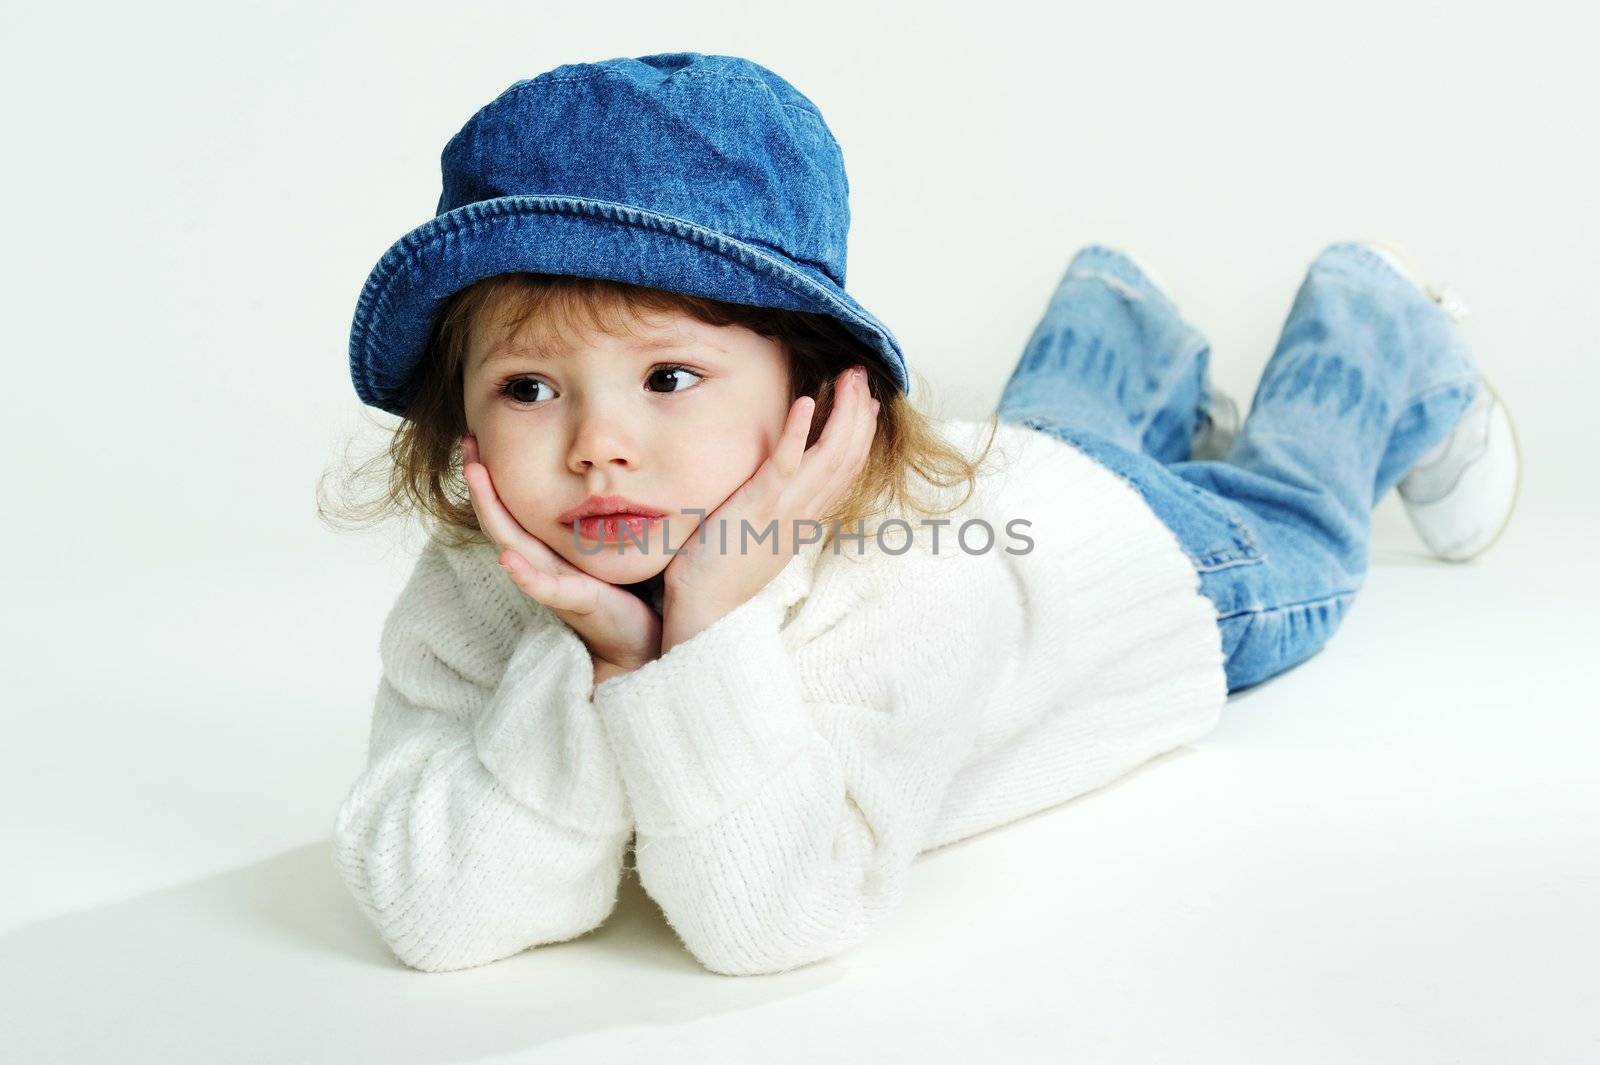 An image of a little girl in a hat and white jumper